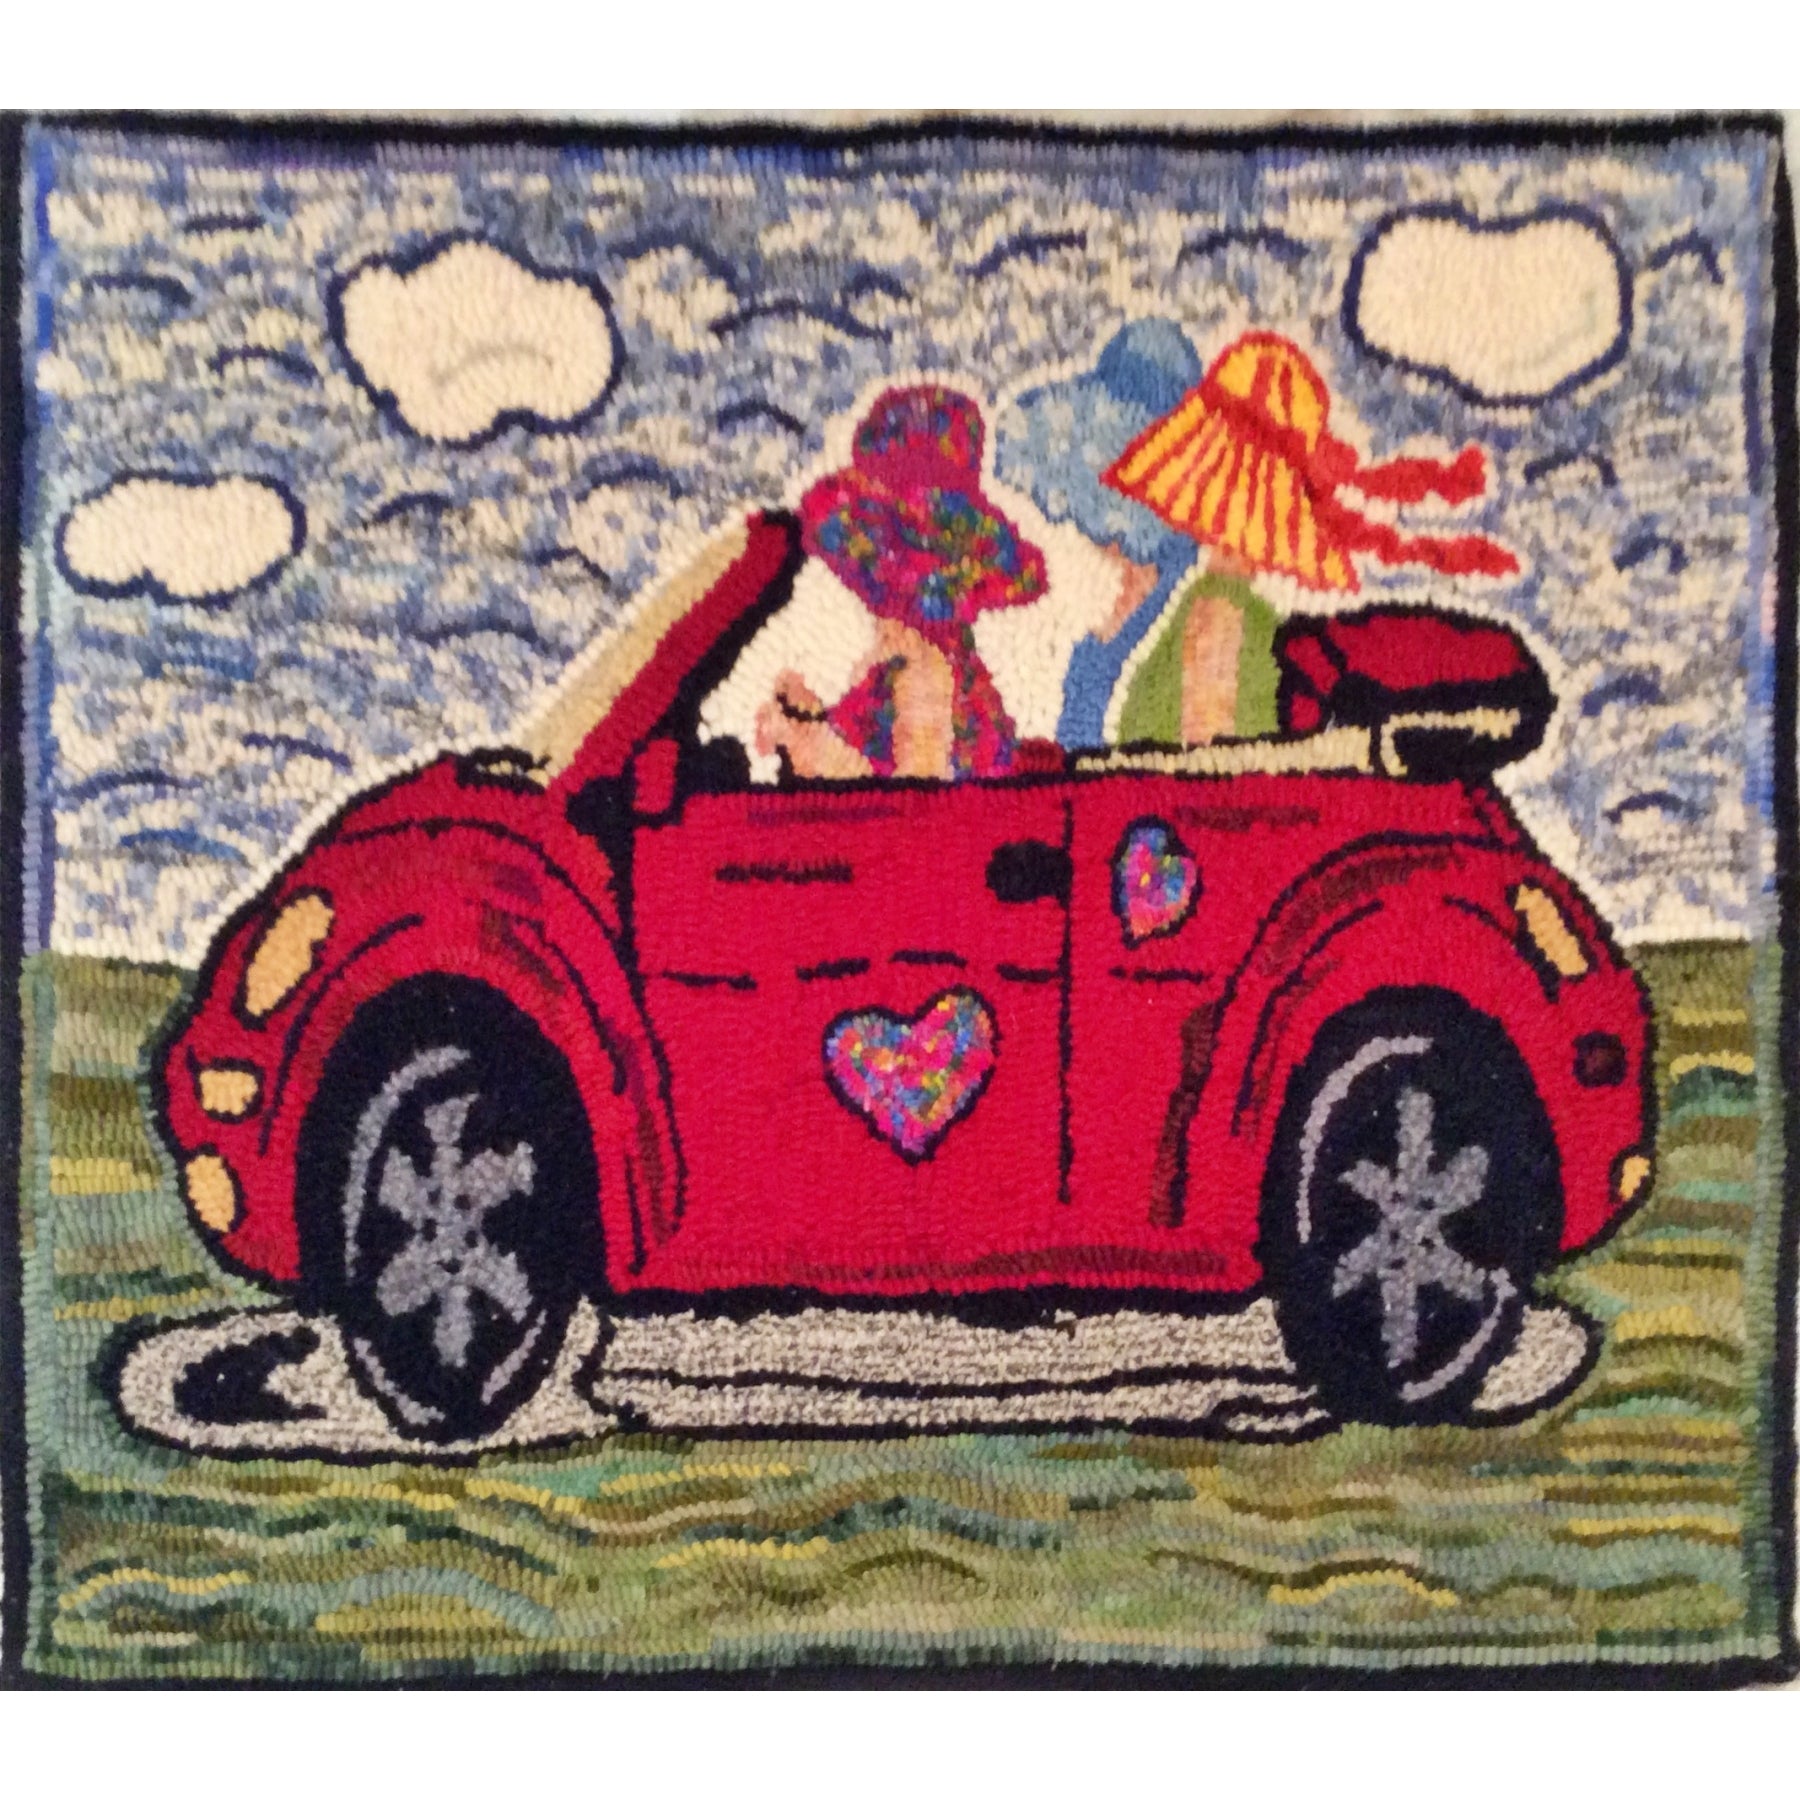 The Girls Cruisin in Style, rug hooked by Karin Payne